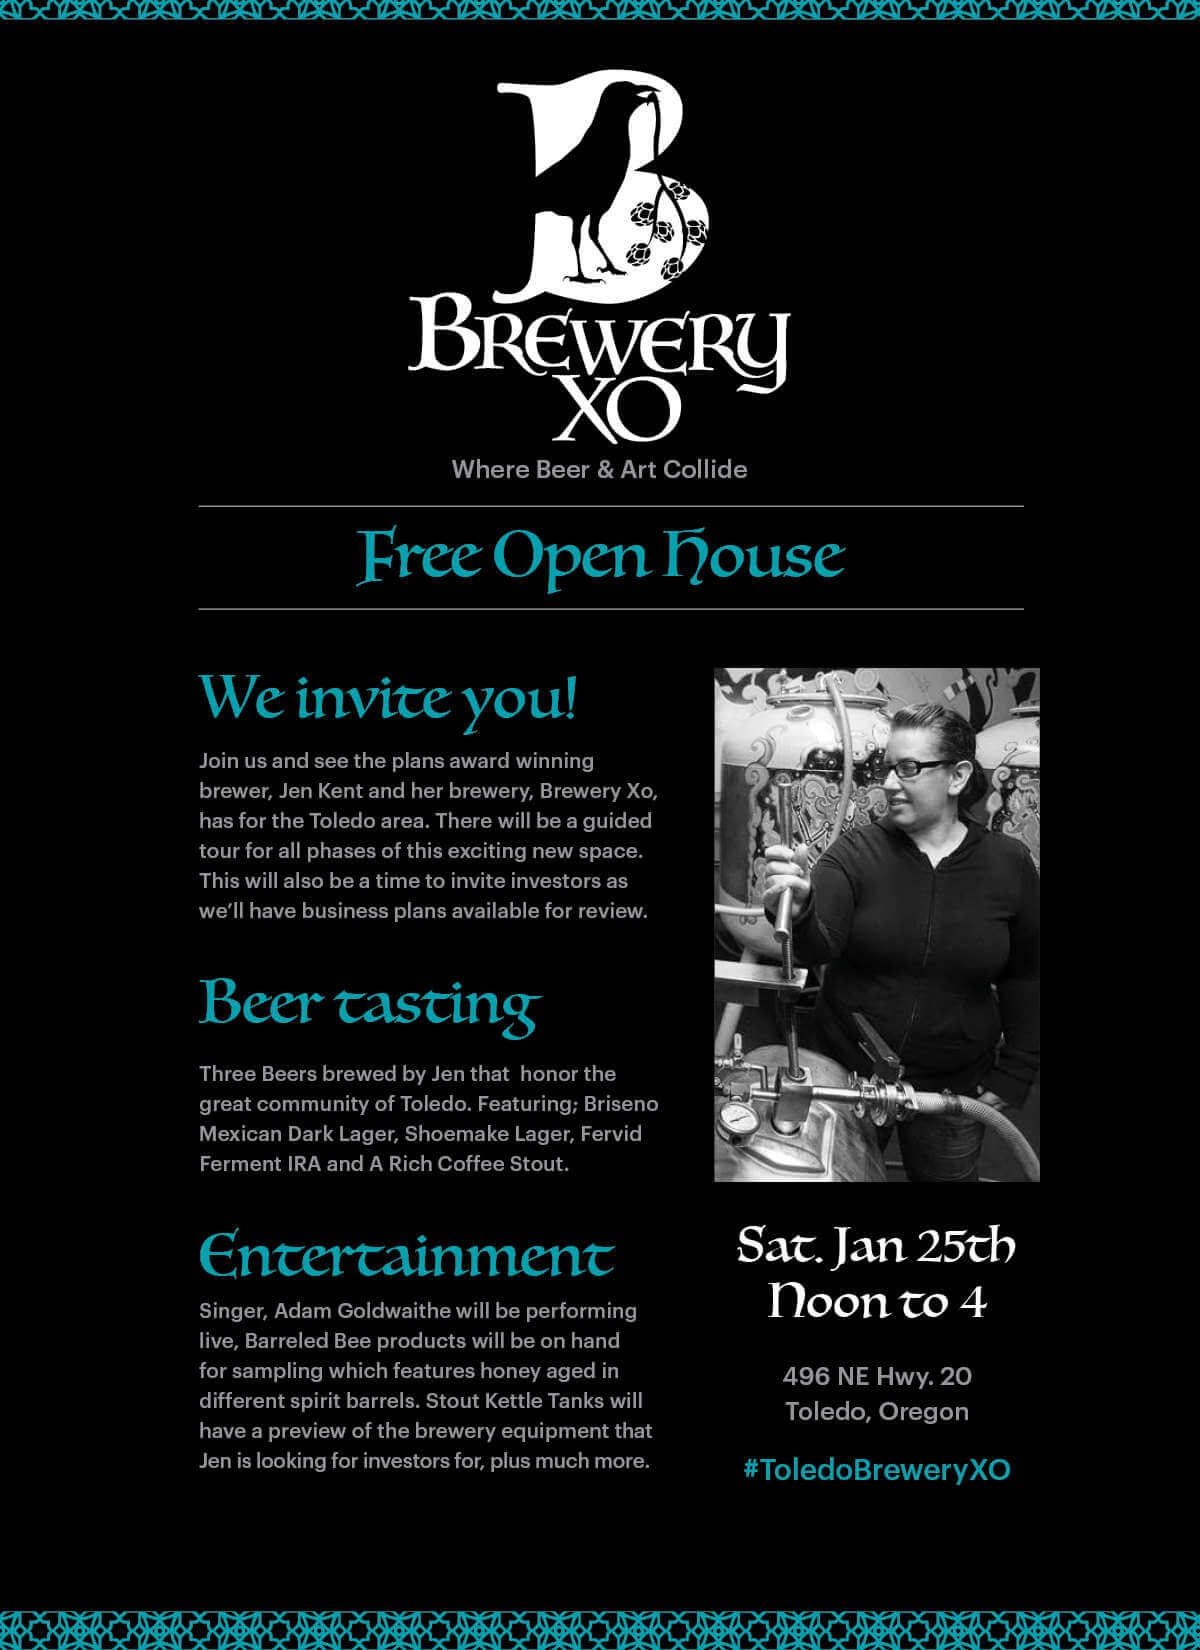 Upcoming Brewery Xo to hold open house this Saturday, and interview with founder Jen Kent